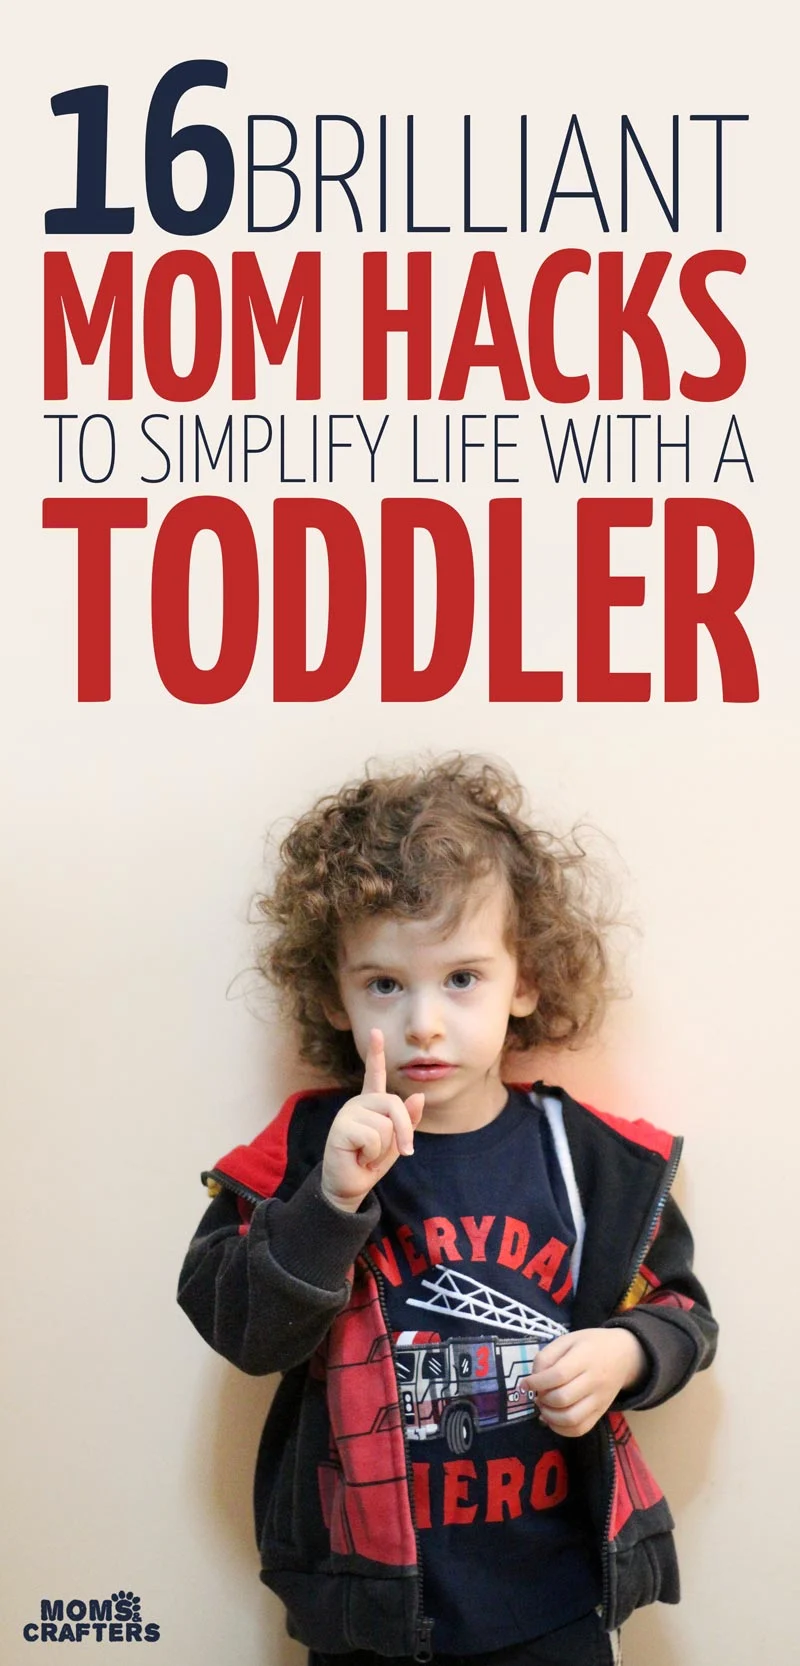 16 genius mom hacks to simplify life with a toddler -these brilliant parenting hacks are perfect for parenting toddlers and preschoolers, with some parenting tips for babies too!